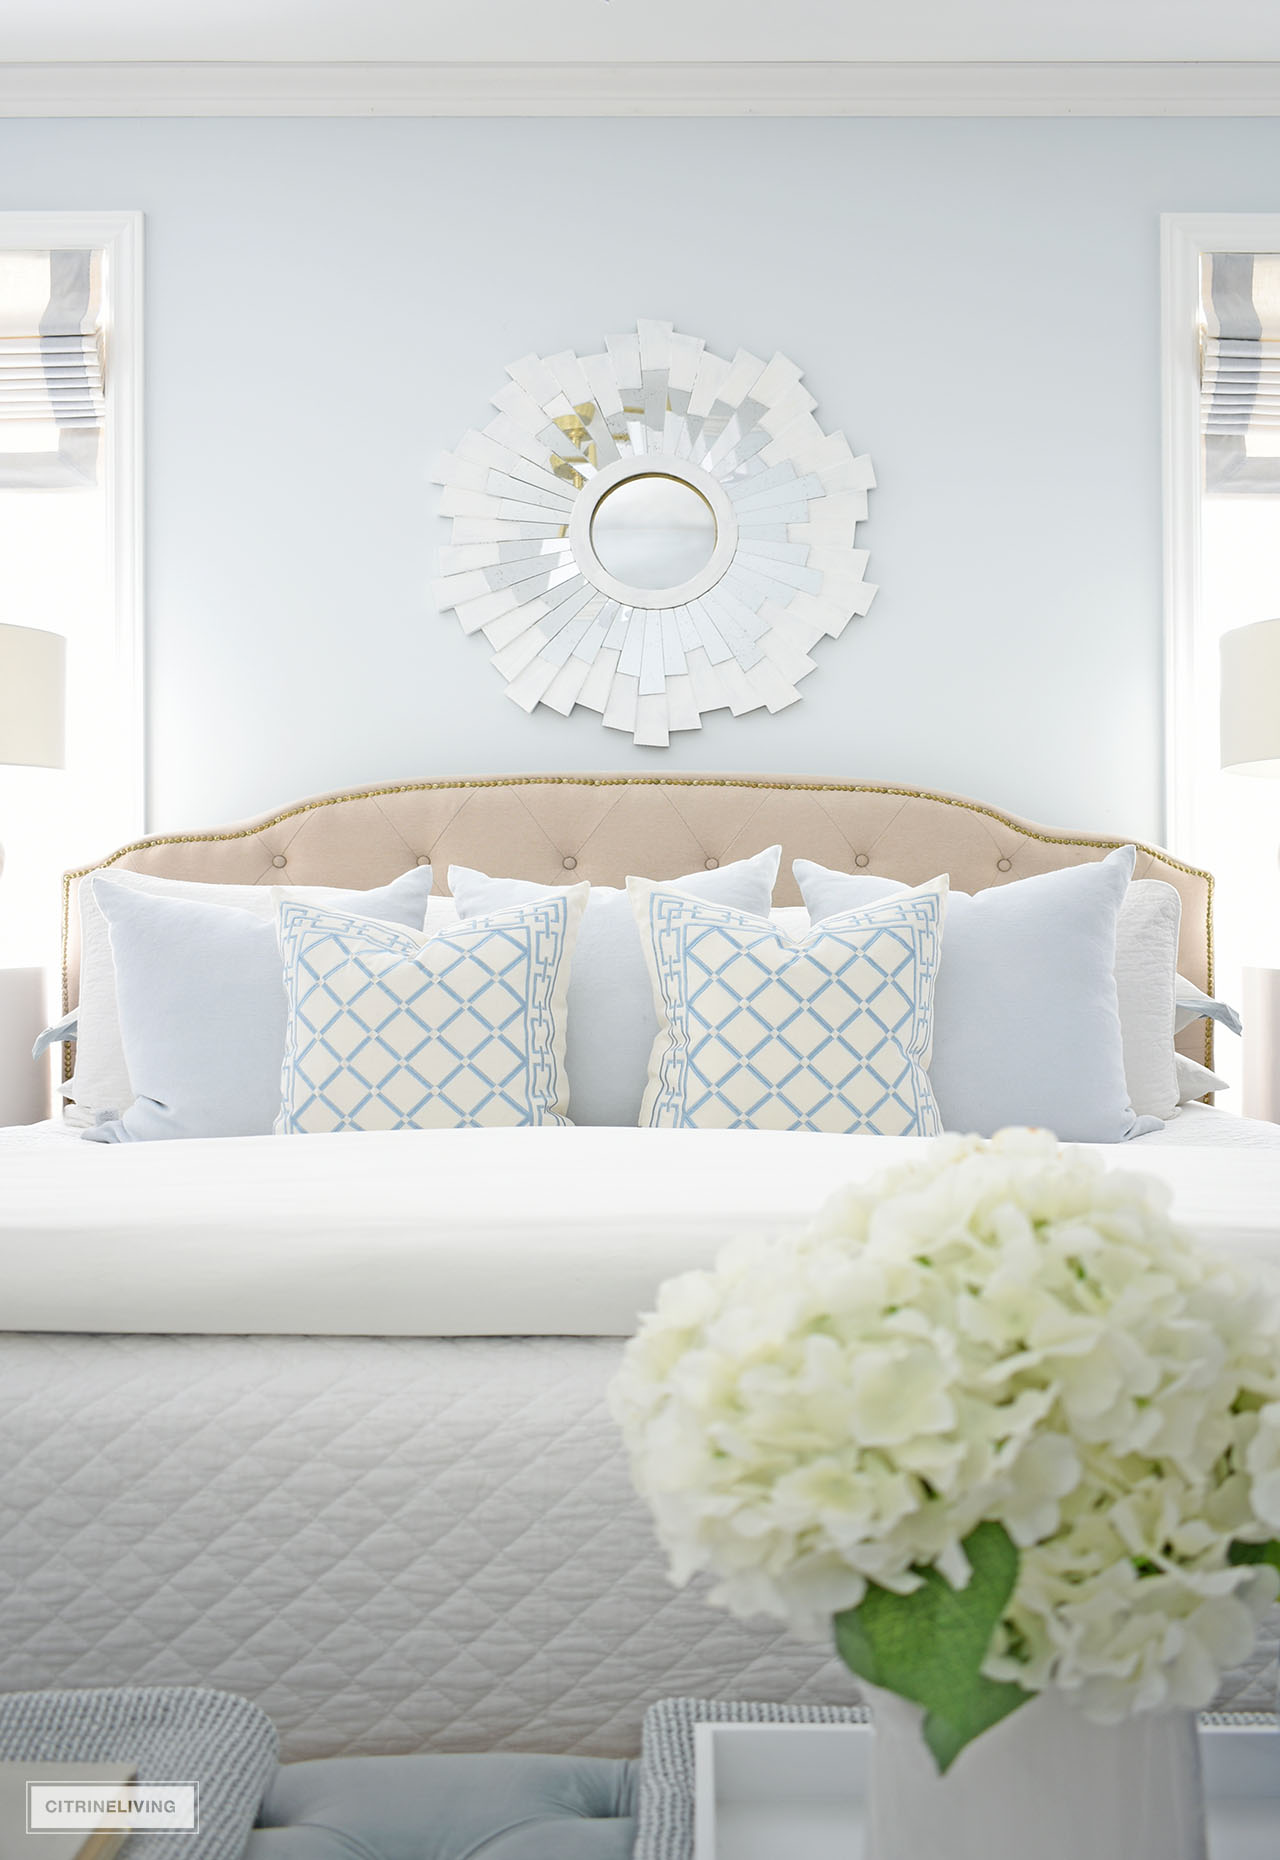 A gorgeous layered bed with light blue and quilted white bedding, and a chic white starburst mirror above the bed.